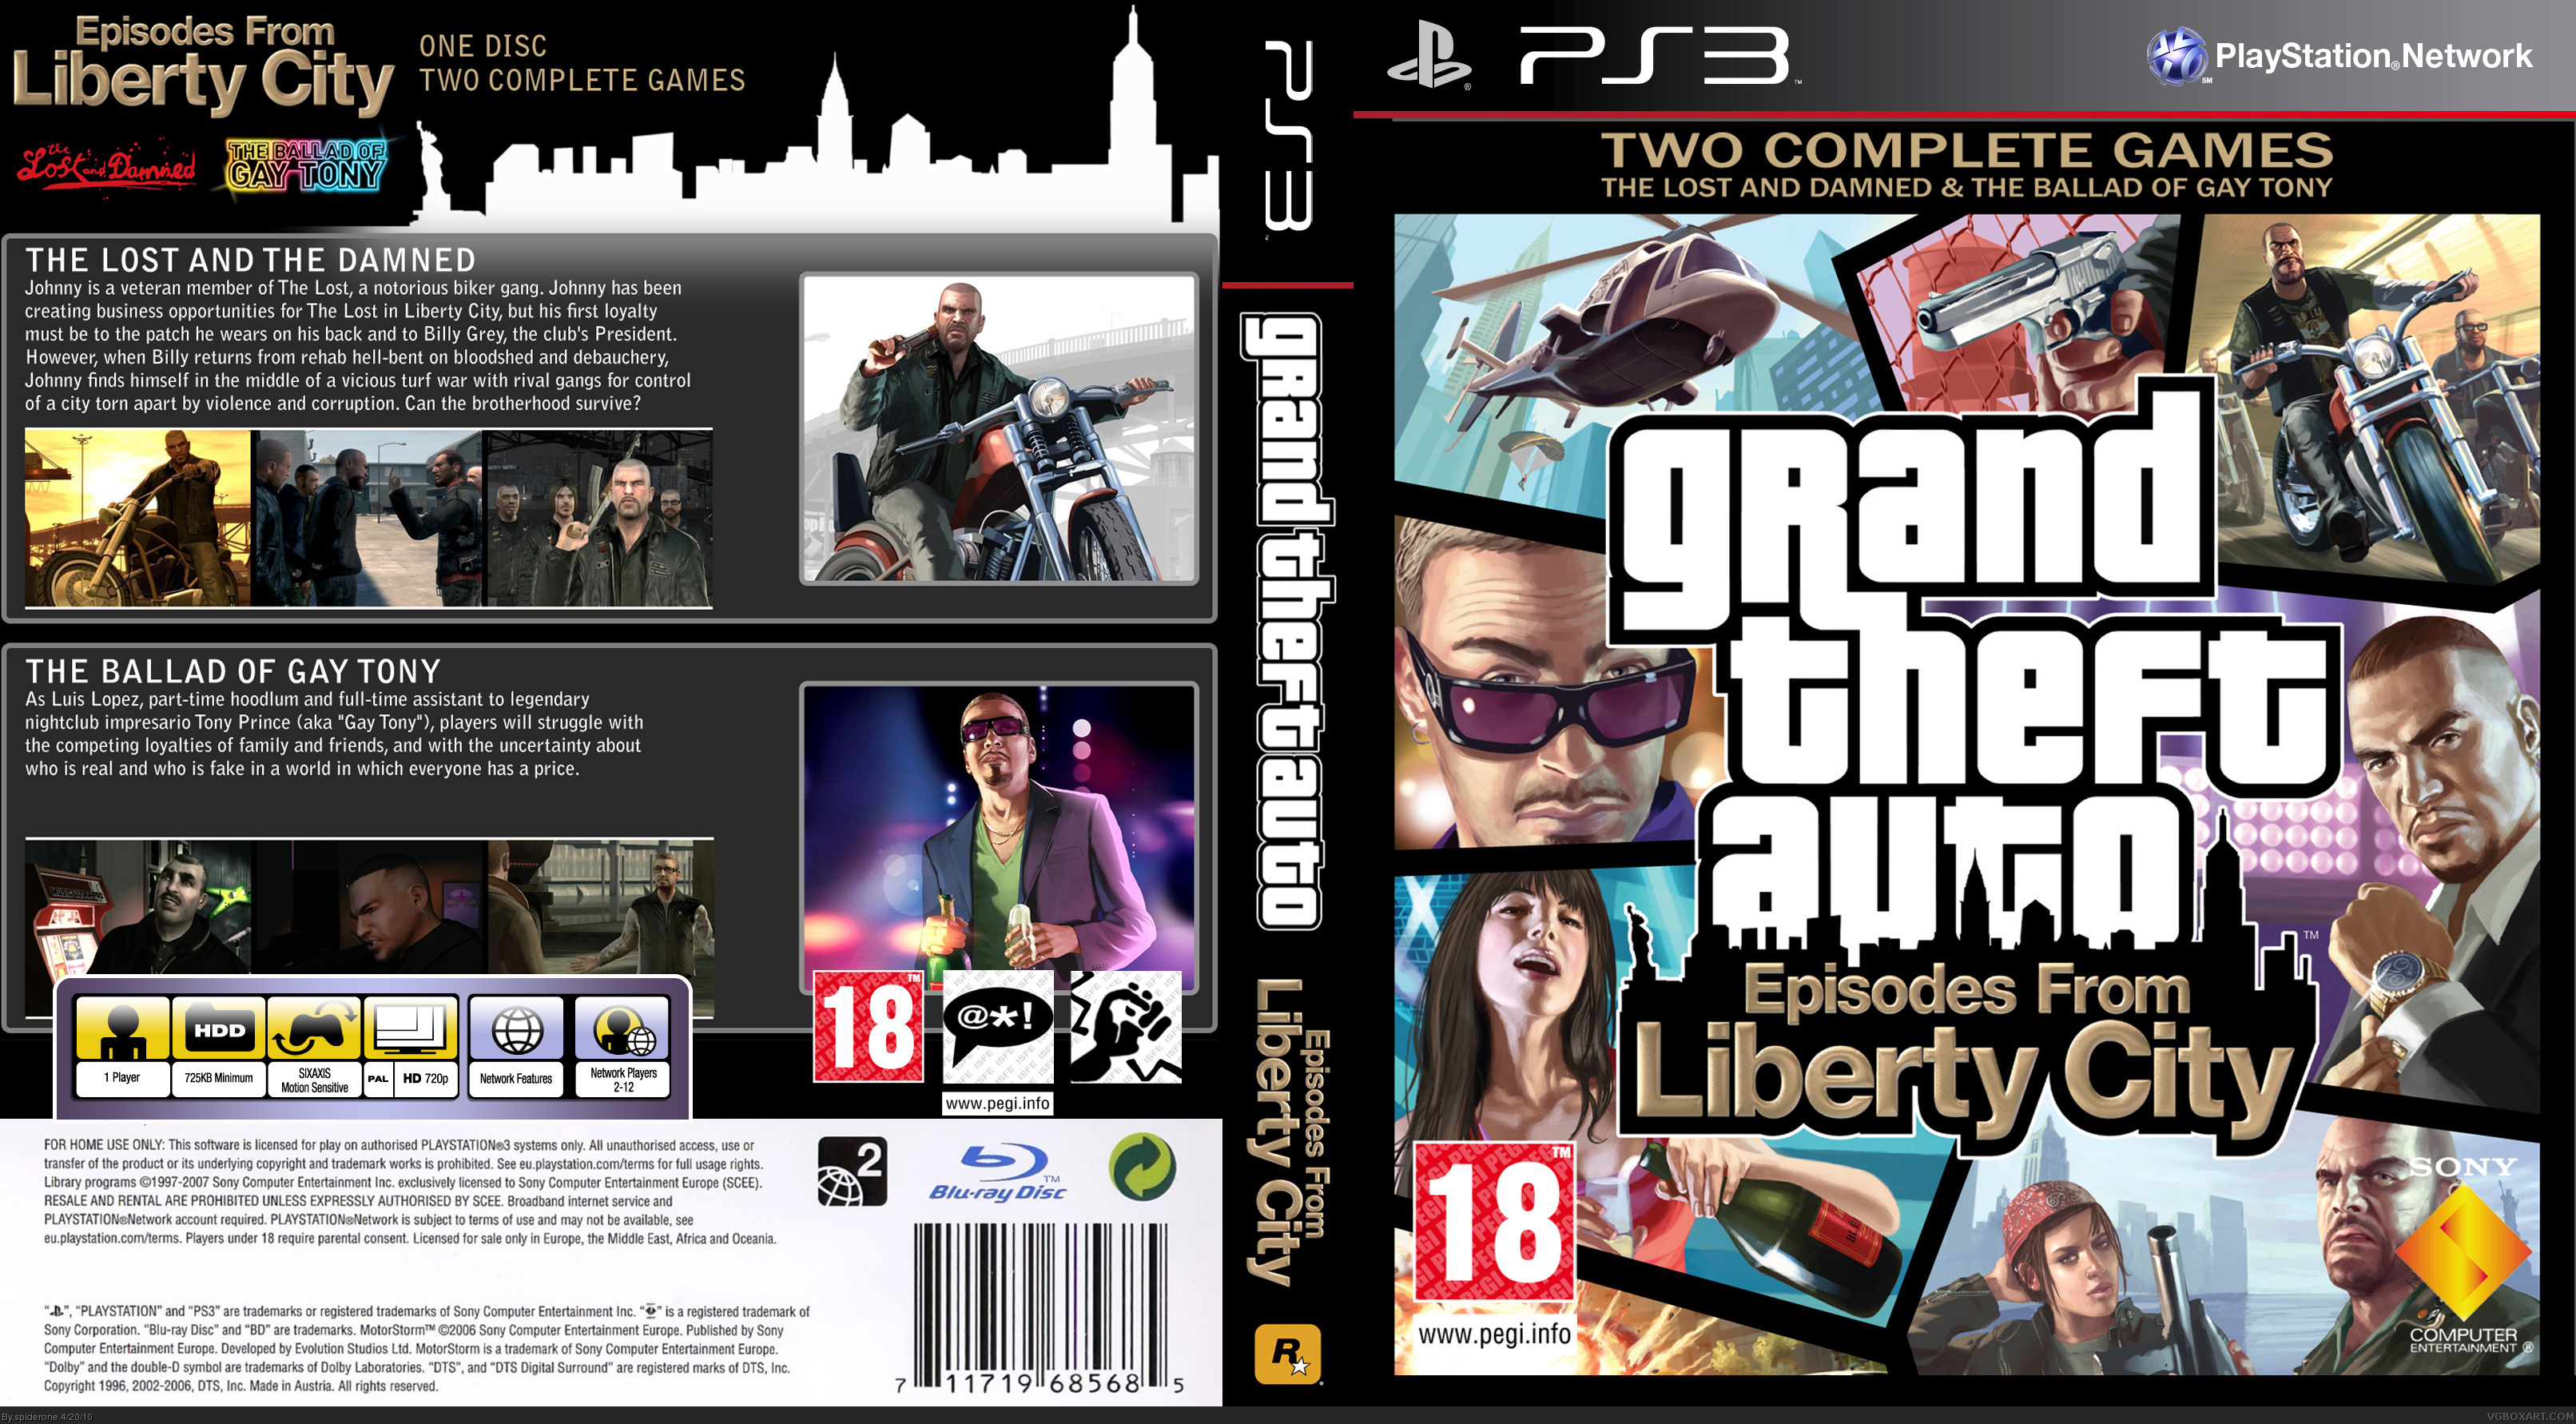 GTA episodes from liberty city box cover